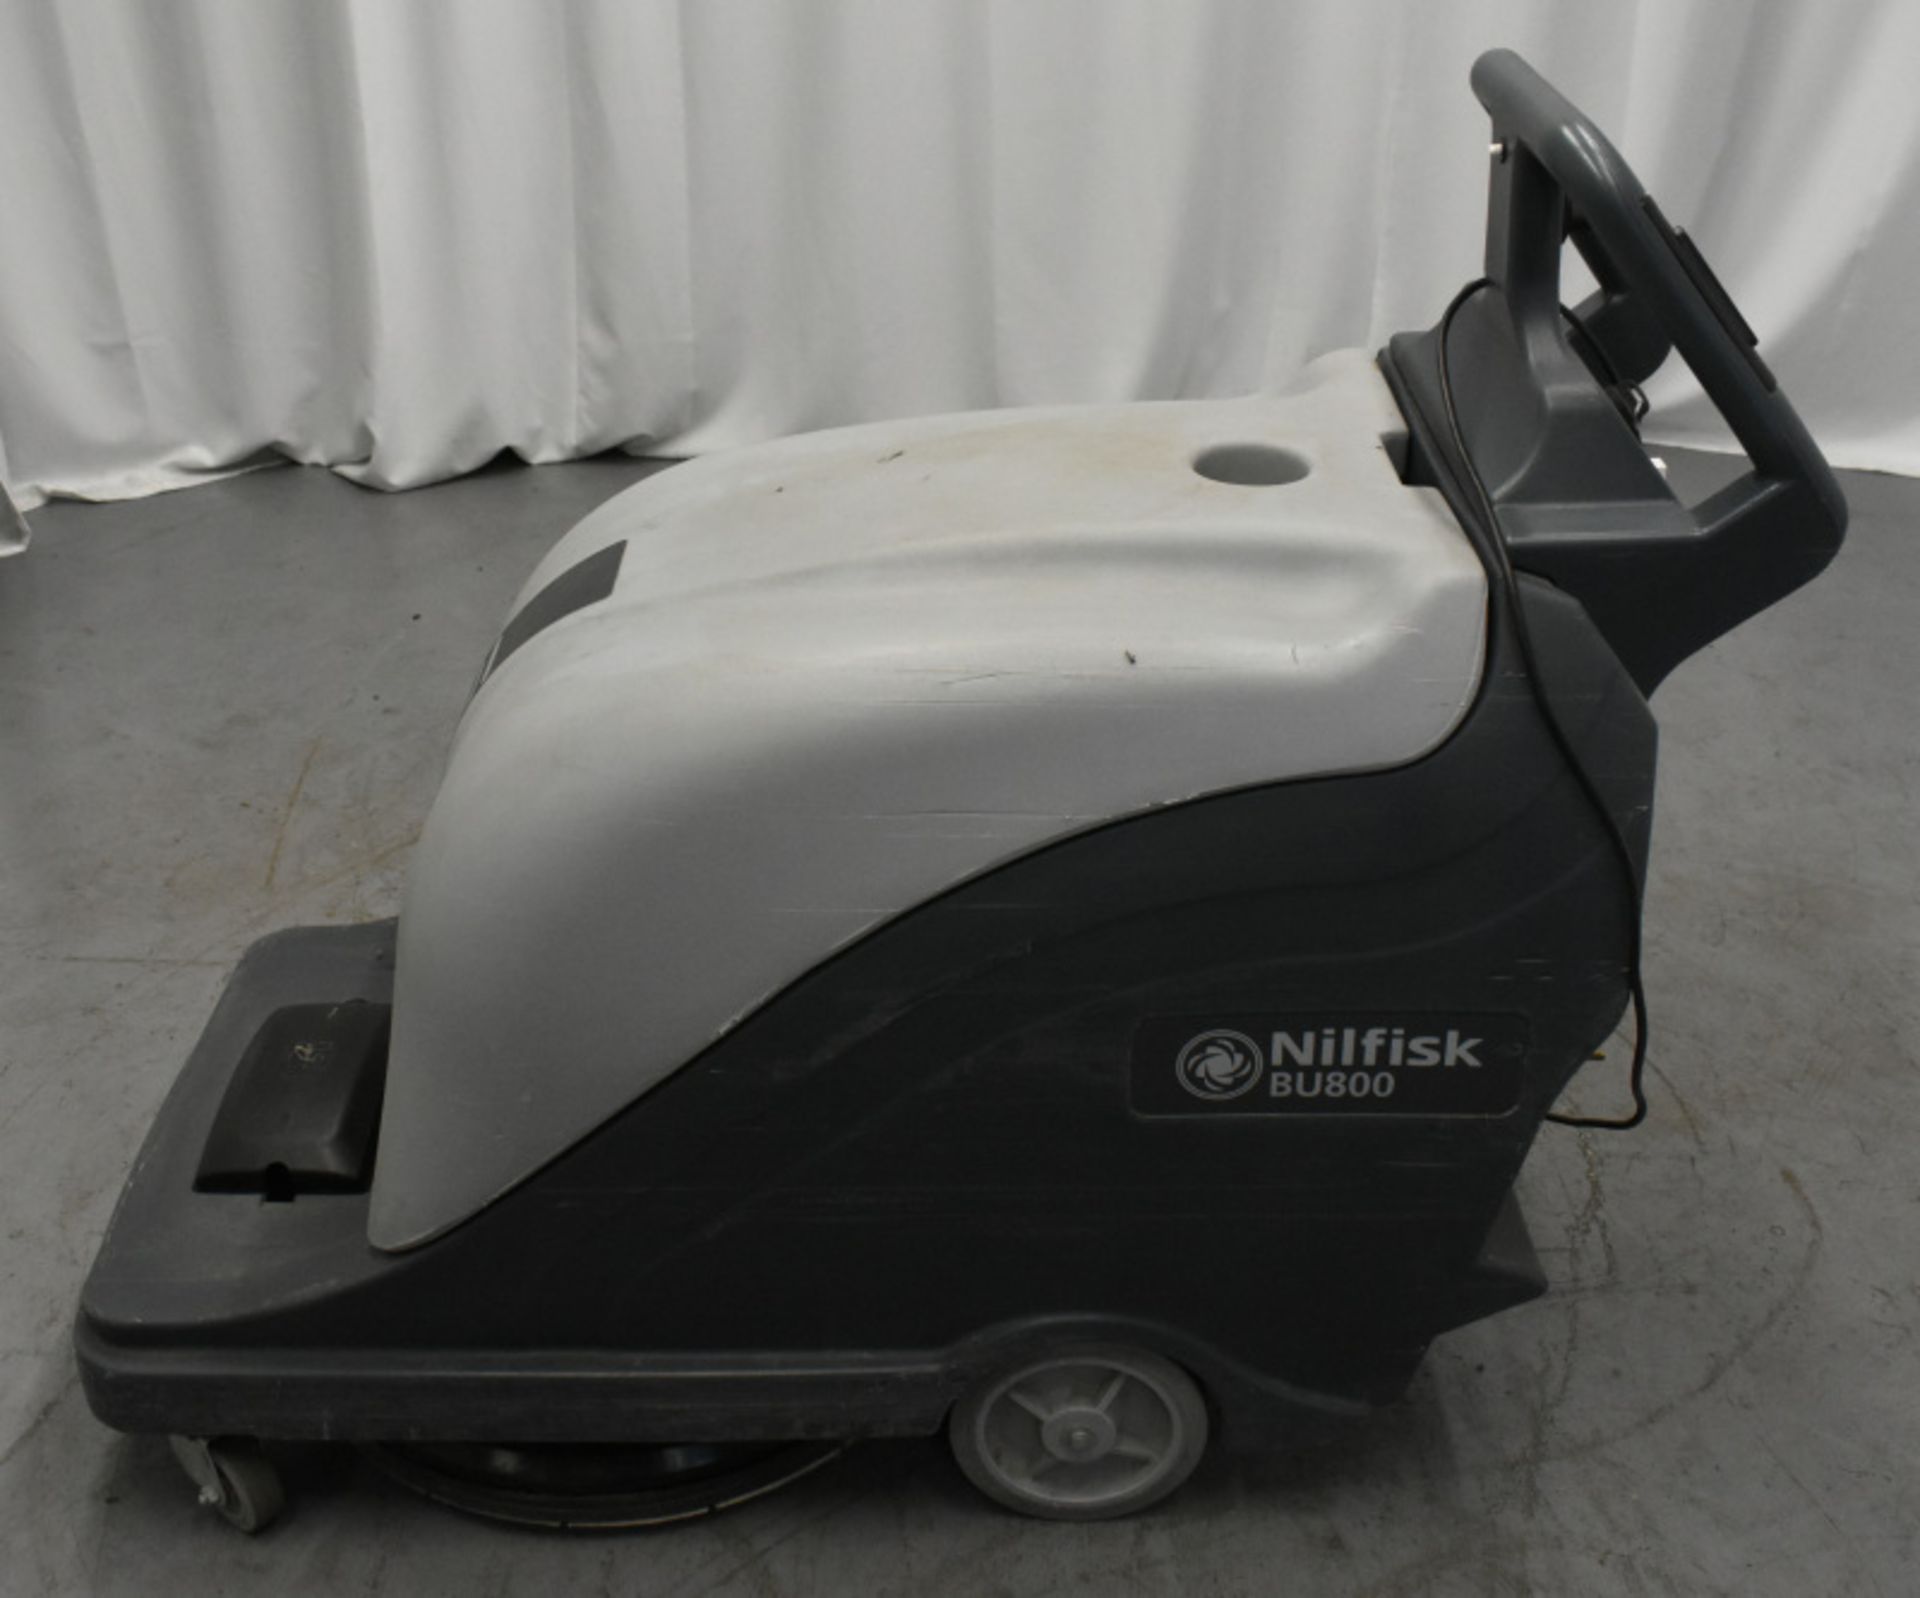 Nilfisk BU800 Floor Cleaner, comes with key, starts and runs- 463 hours